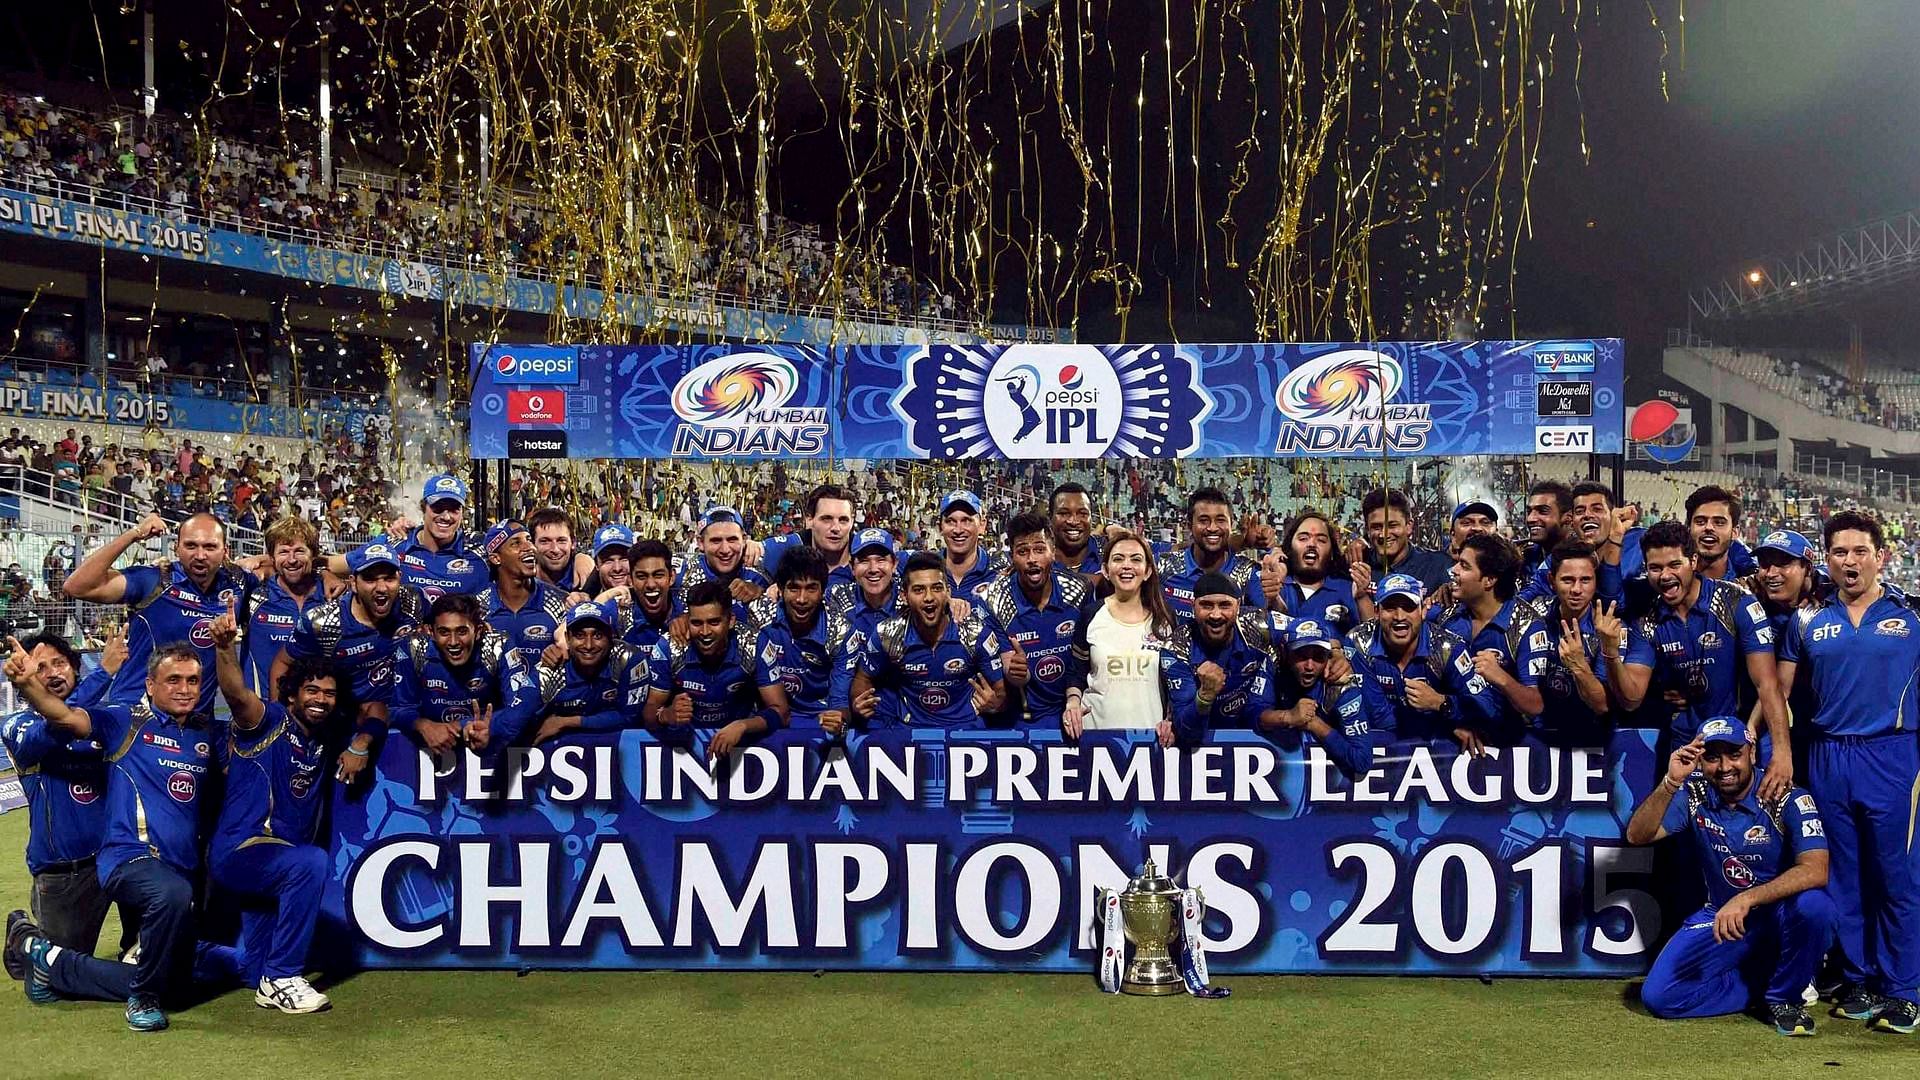 According to Rajiv Shukla, 2015 Champions Mumbai Indians will get a chance to defend their title in 2016. (Photo: PTI)